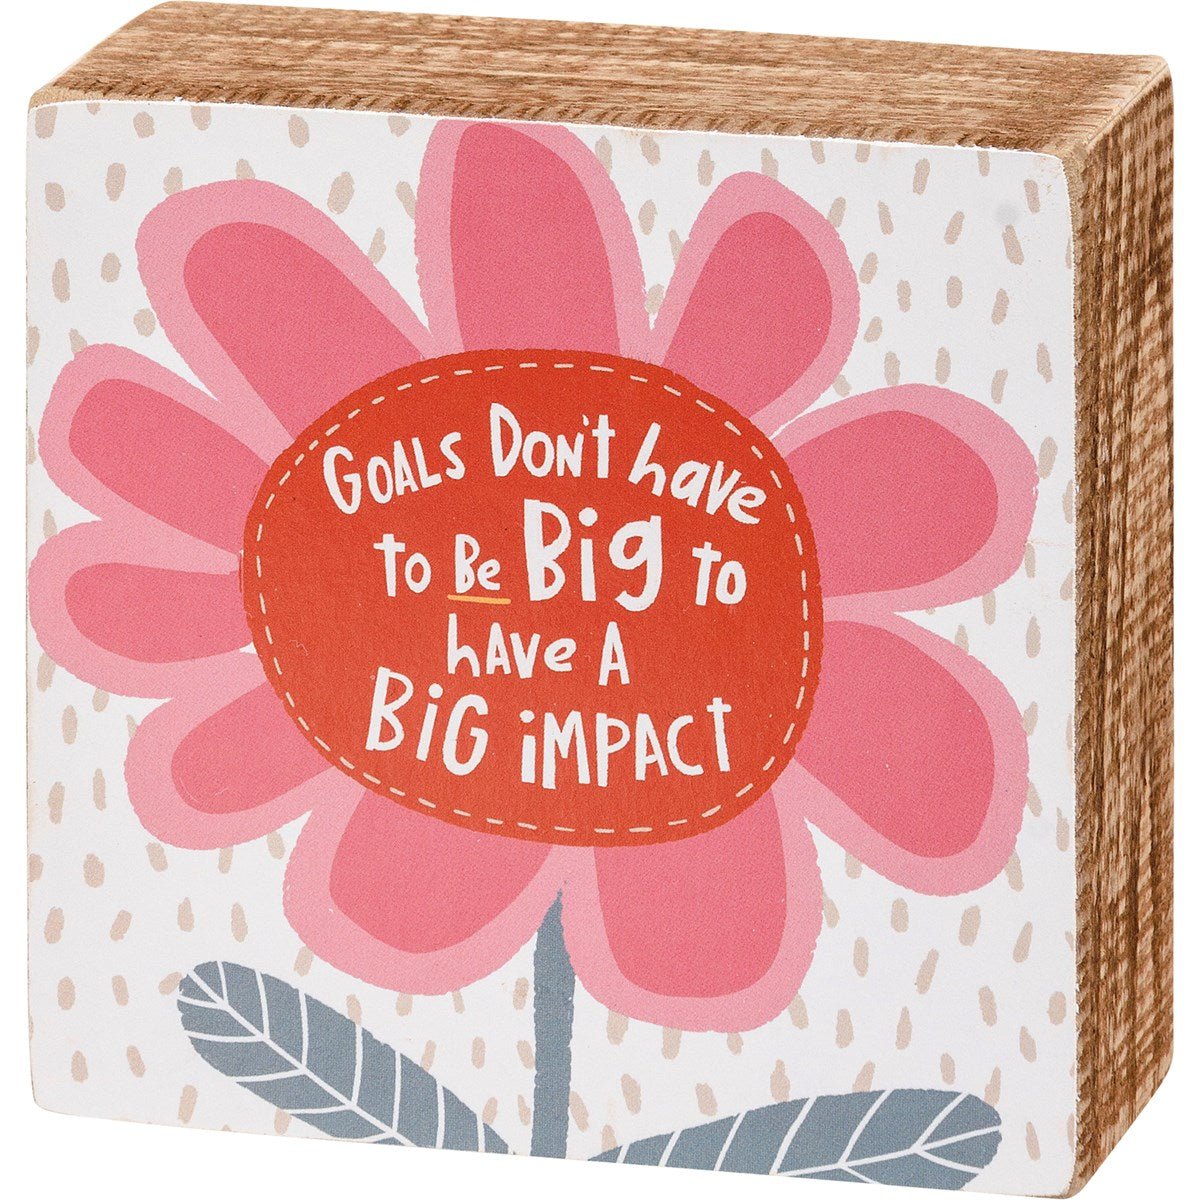 A Big Impact Box Sign & Sock Gift Set - The Kindness Cause